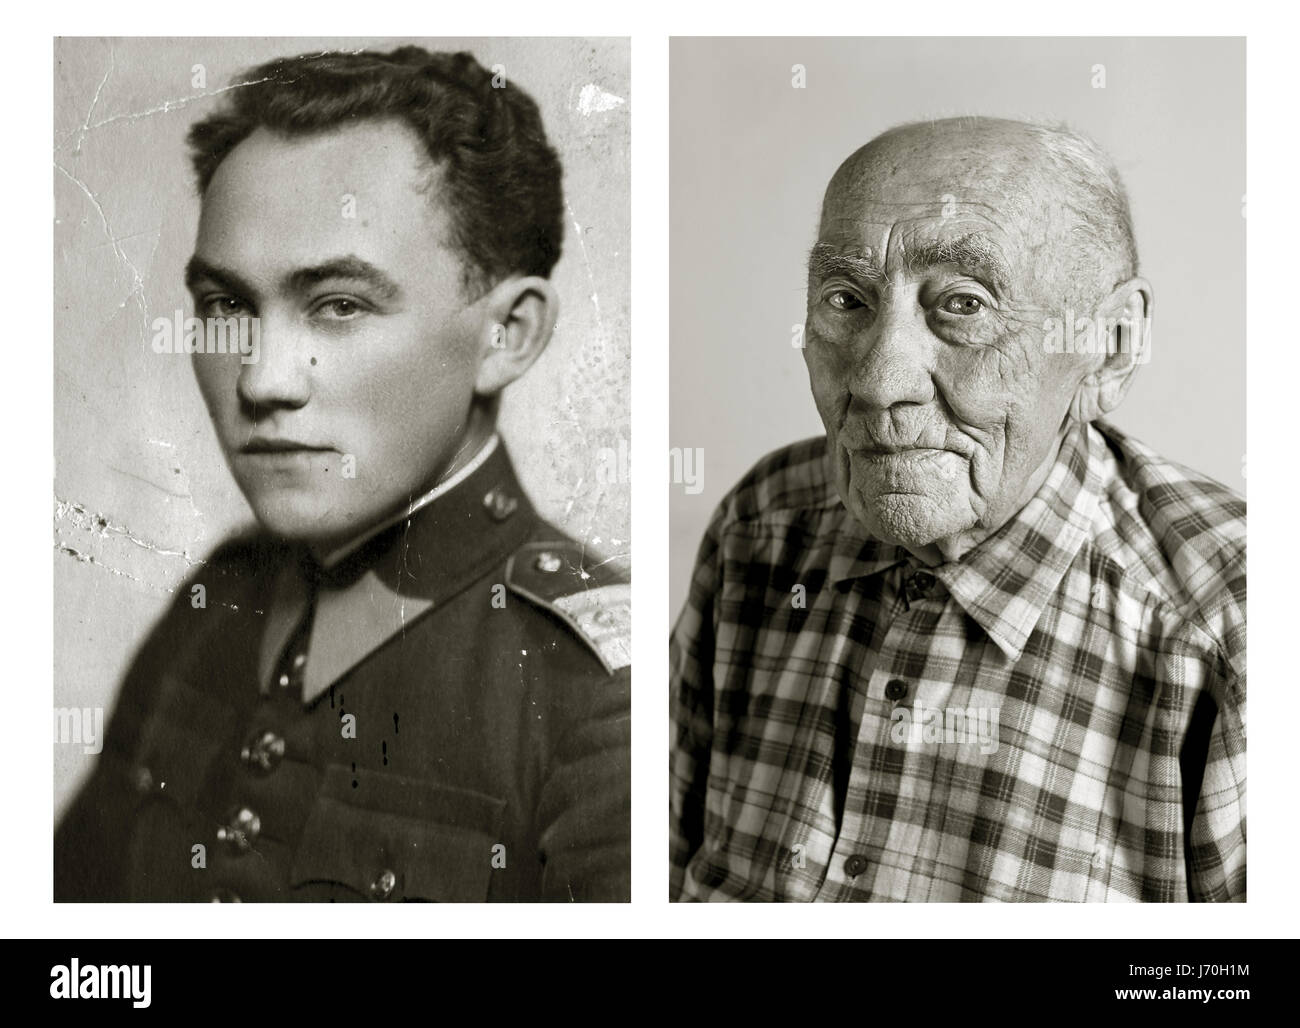 Prokop Vejdělek. Left: 22 years old, right: 101 years old. He was a metallurgical engineer and lives on a family farm with his daughter. POIGNANT portraits have posed centenarians alongside their younger selves in a project called Faces of Century. The incredible images tell the unique stories of each person’s life including one woman who was in the truck that hit and killed high-ranking German Nazi official Reinhard Heydrich’s son Klaus in 1943. Another intriguing tale comes from a 101-year-old woman who decided to leave her luxury villa after turning 101 and burnt all material memories of he Stock Photo